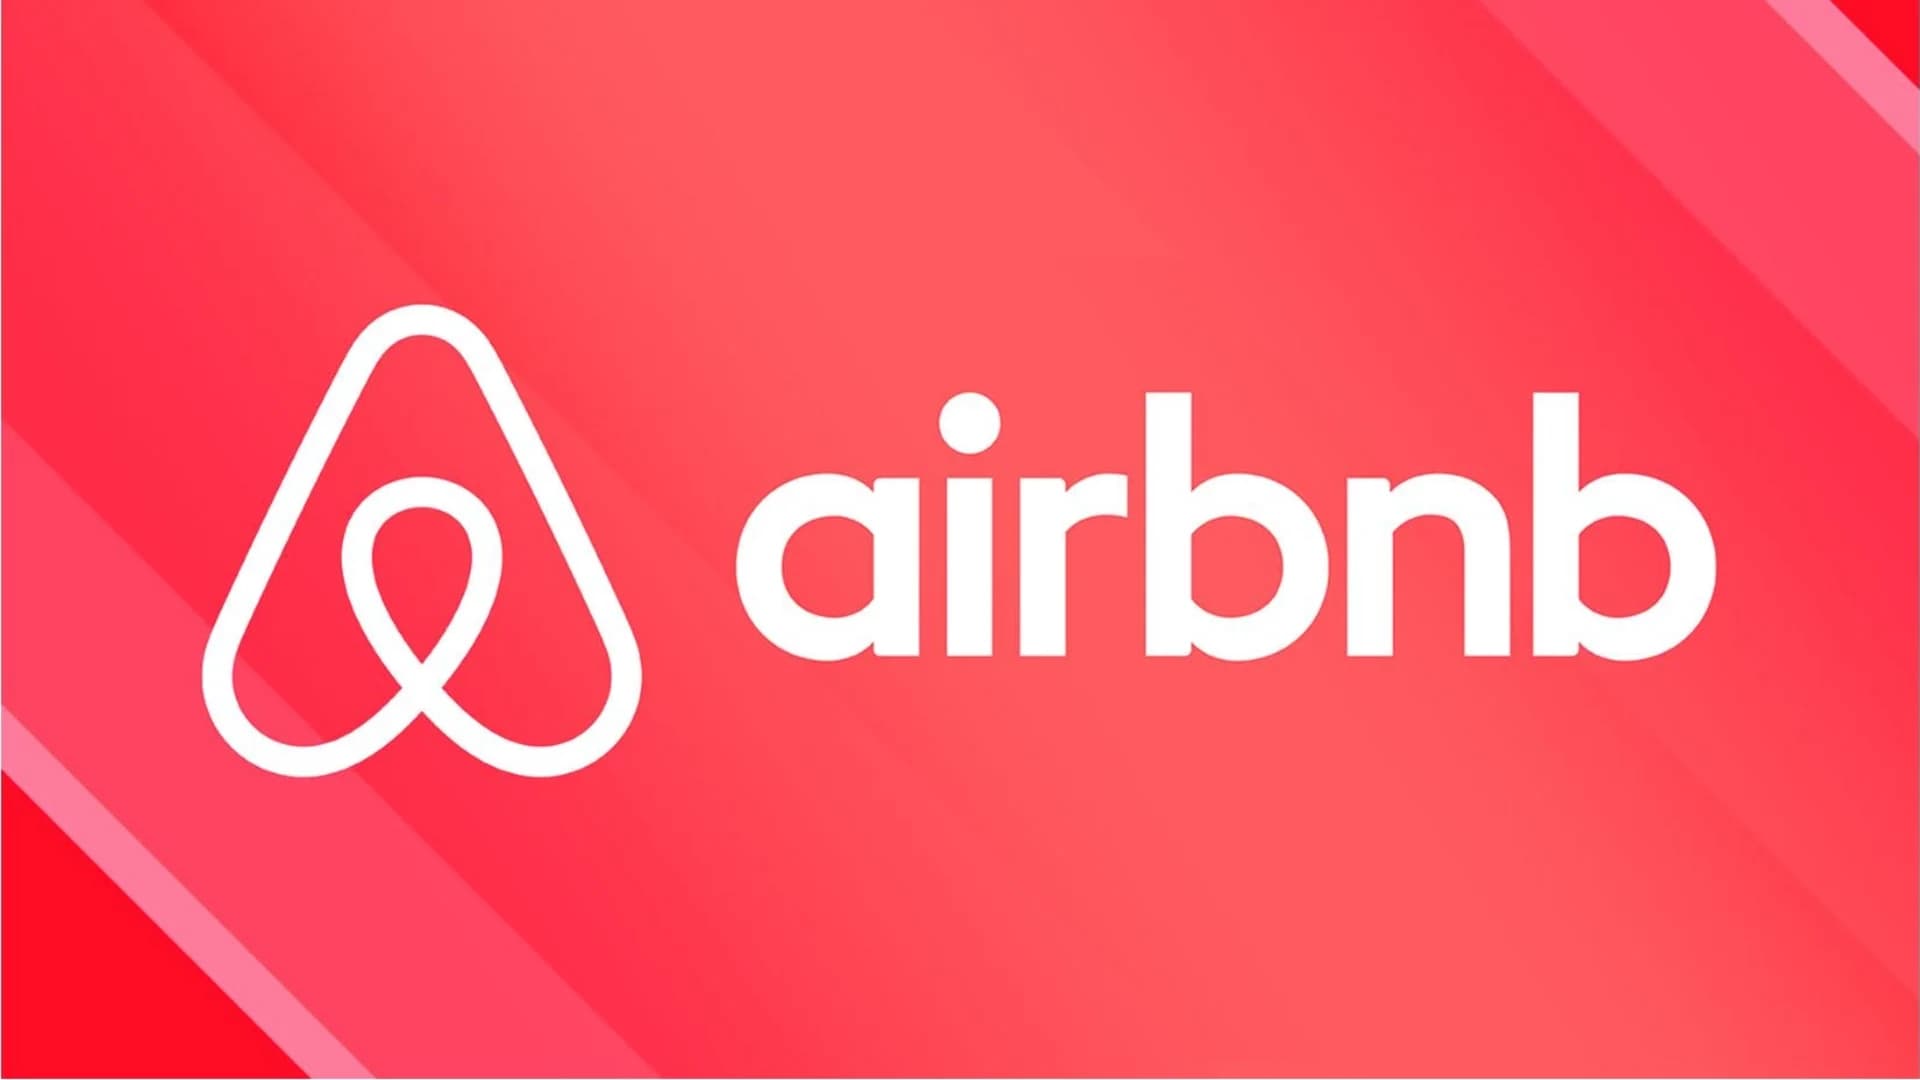 Jersey City voters to decide on hotly contested Airbnb rules